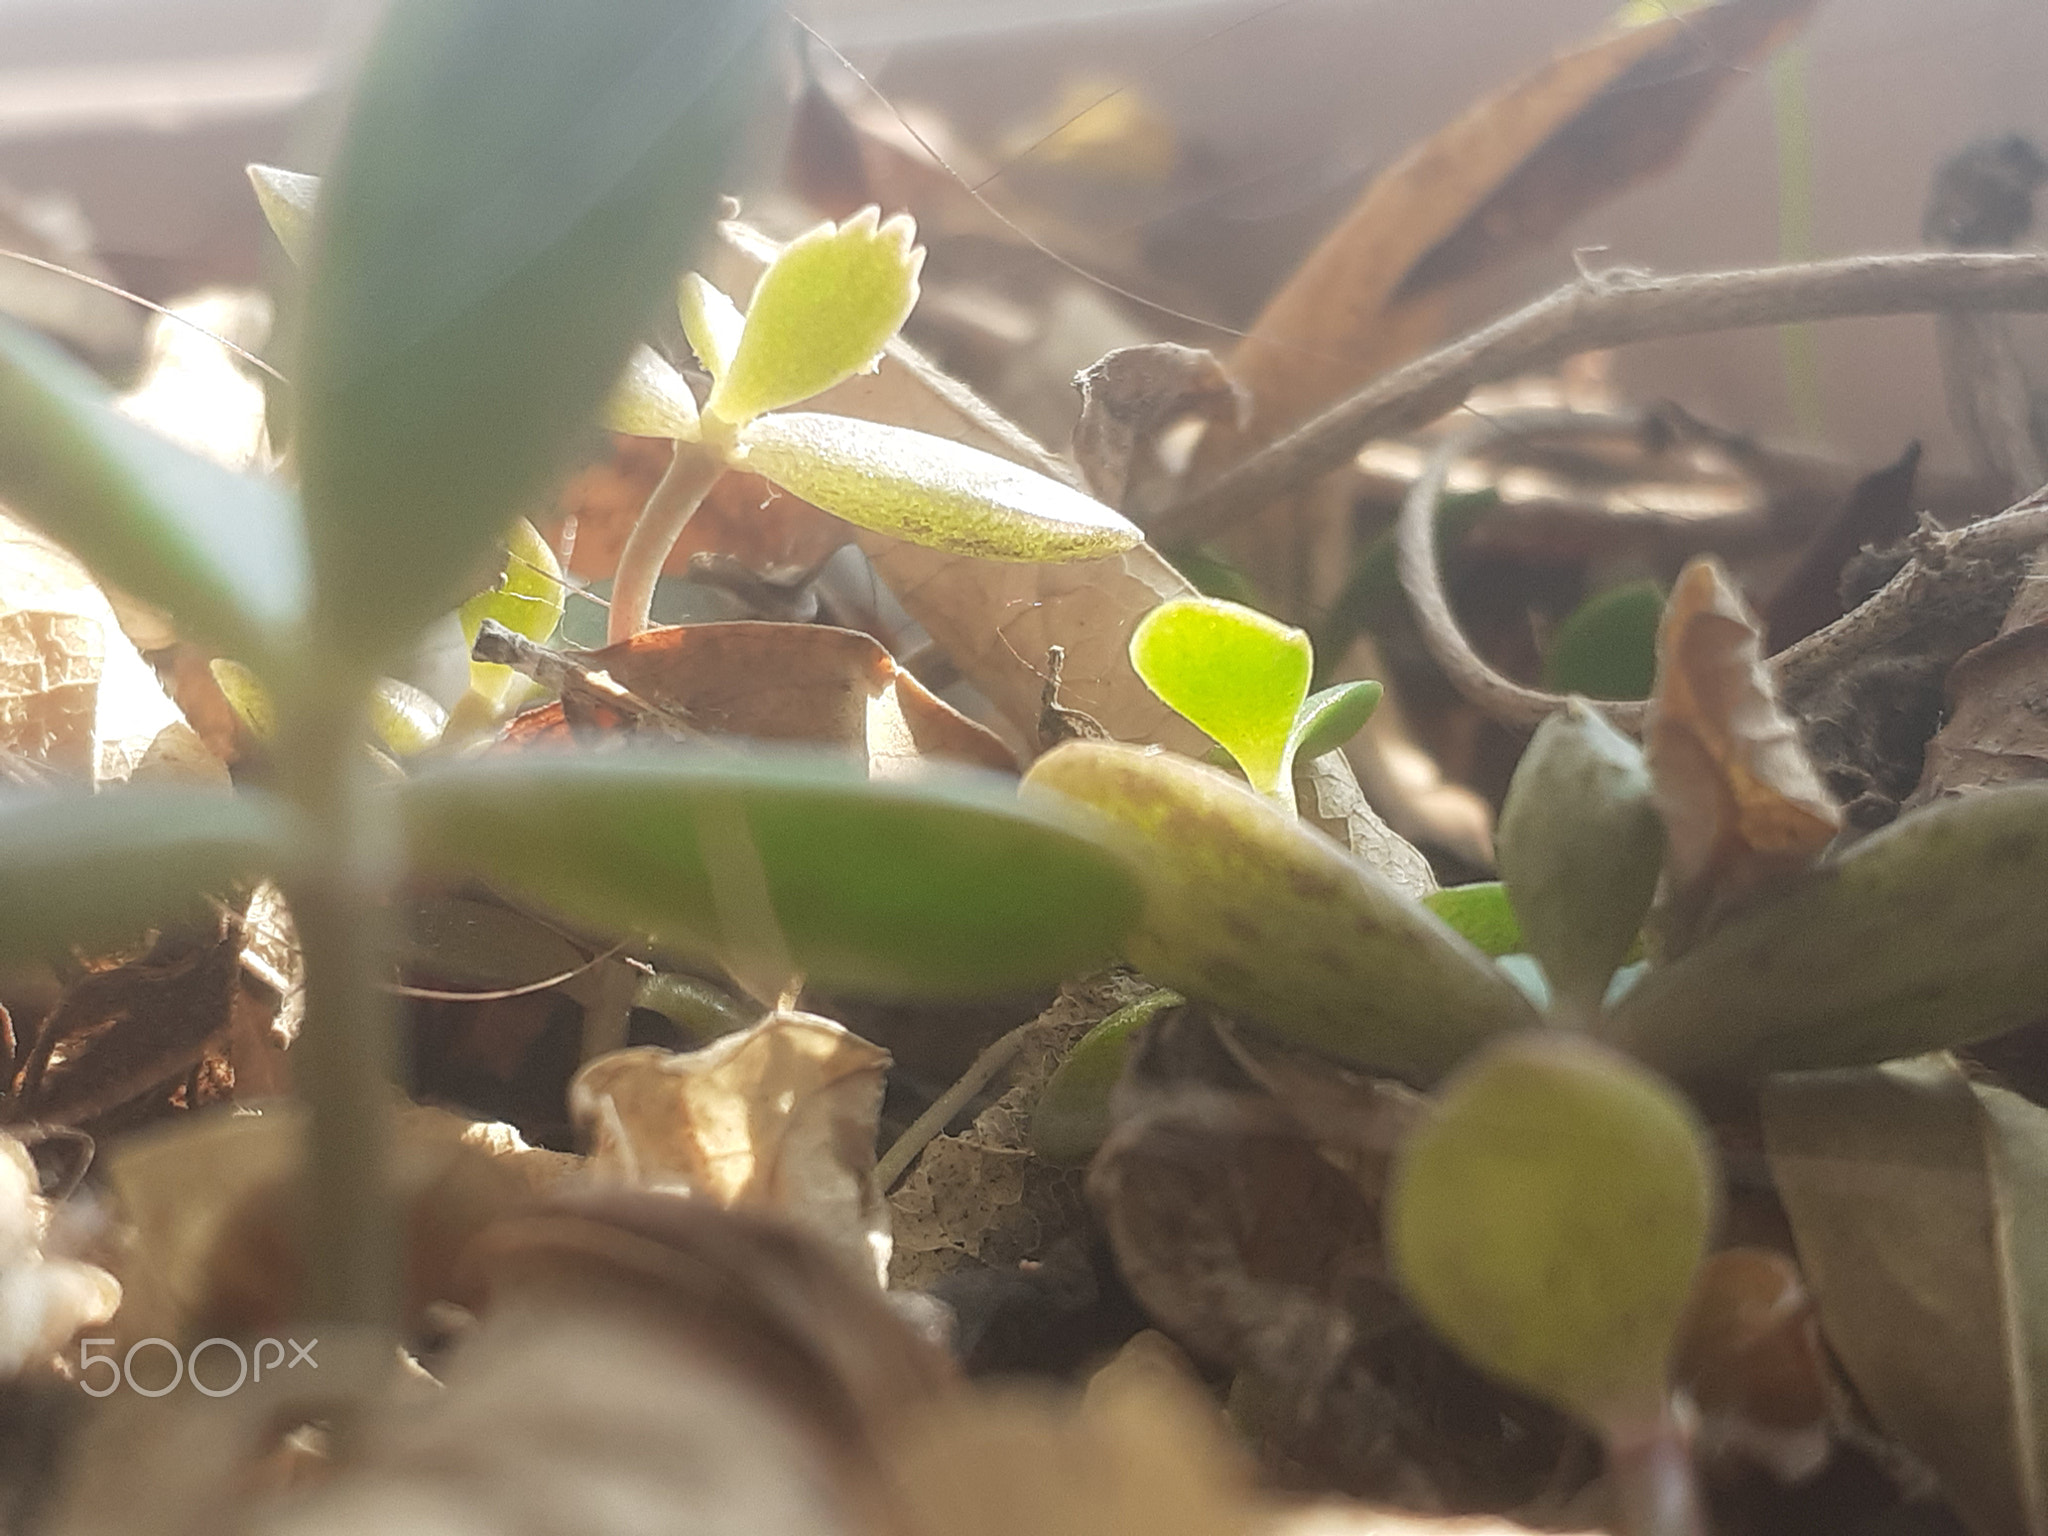 LIFE OF SMALL PLANT